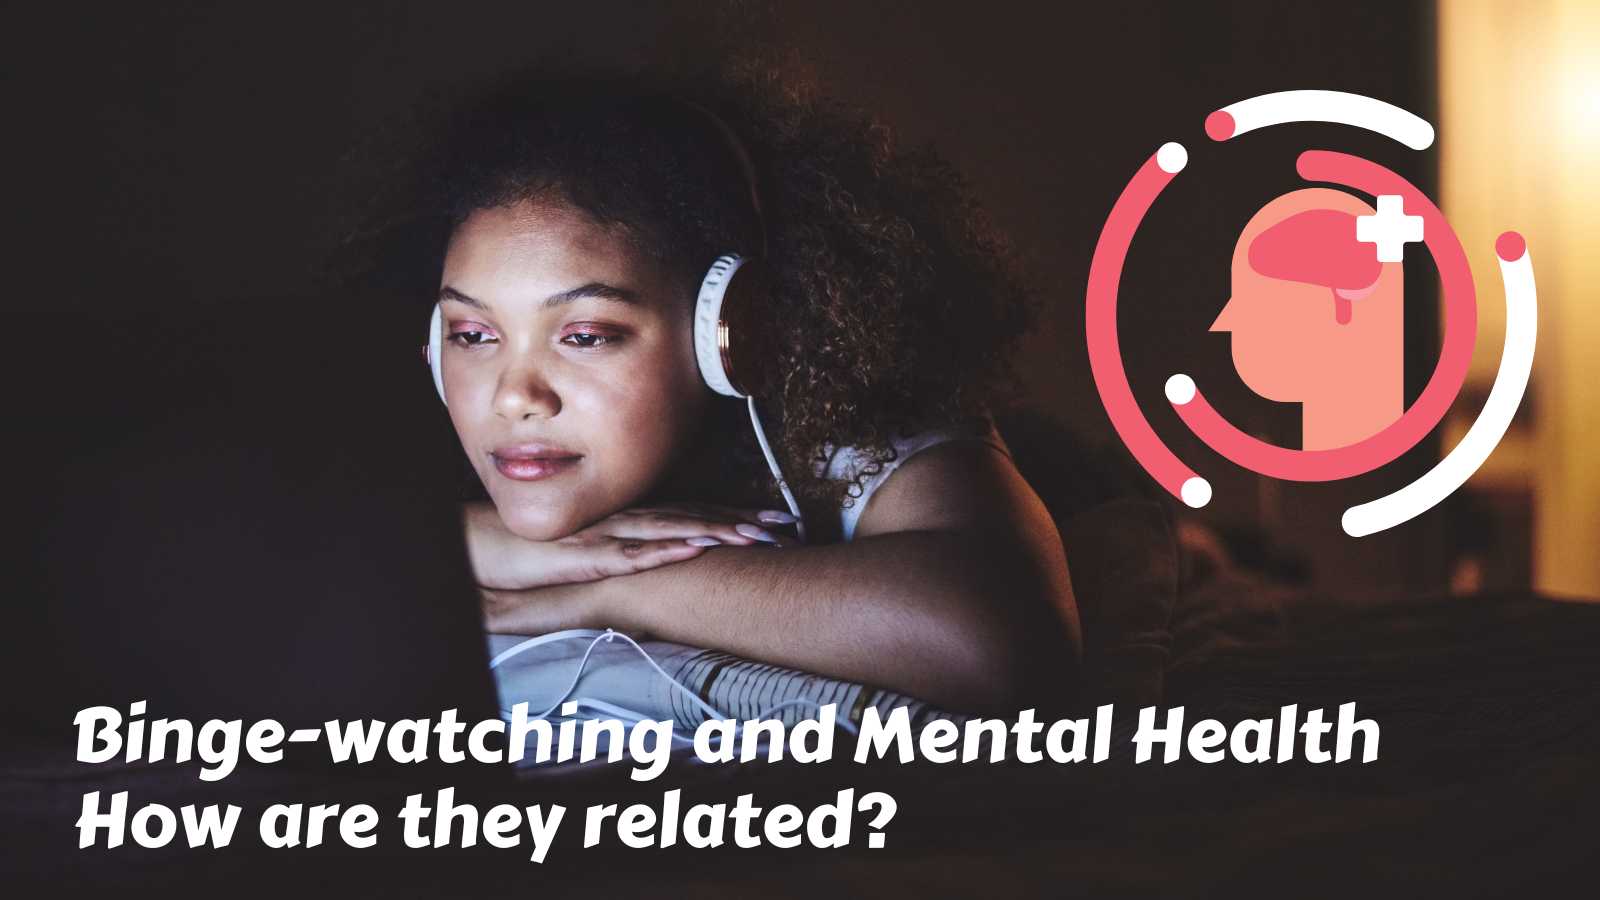 Binge-watching and mental health - How are they related